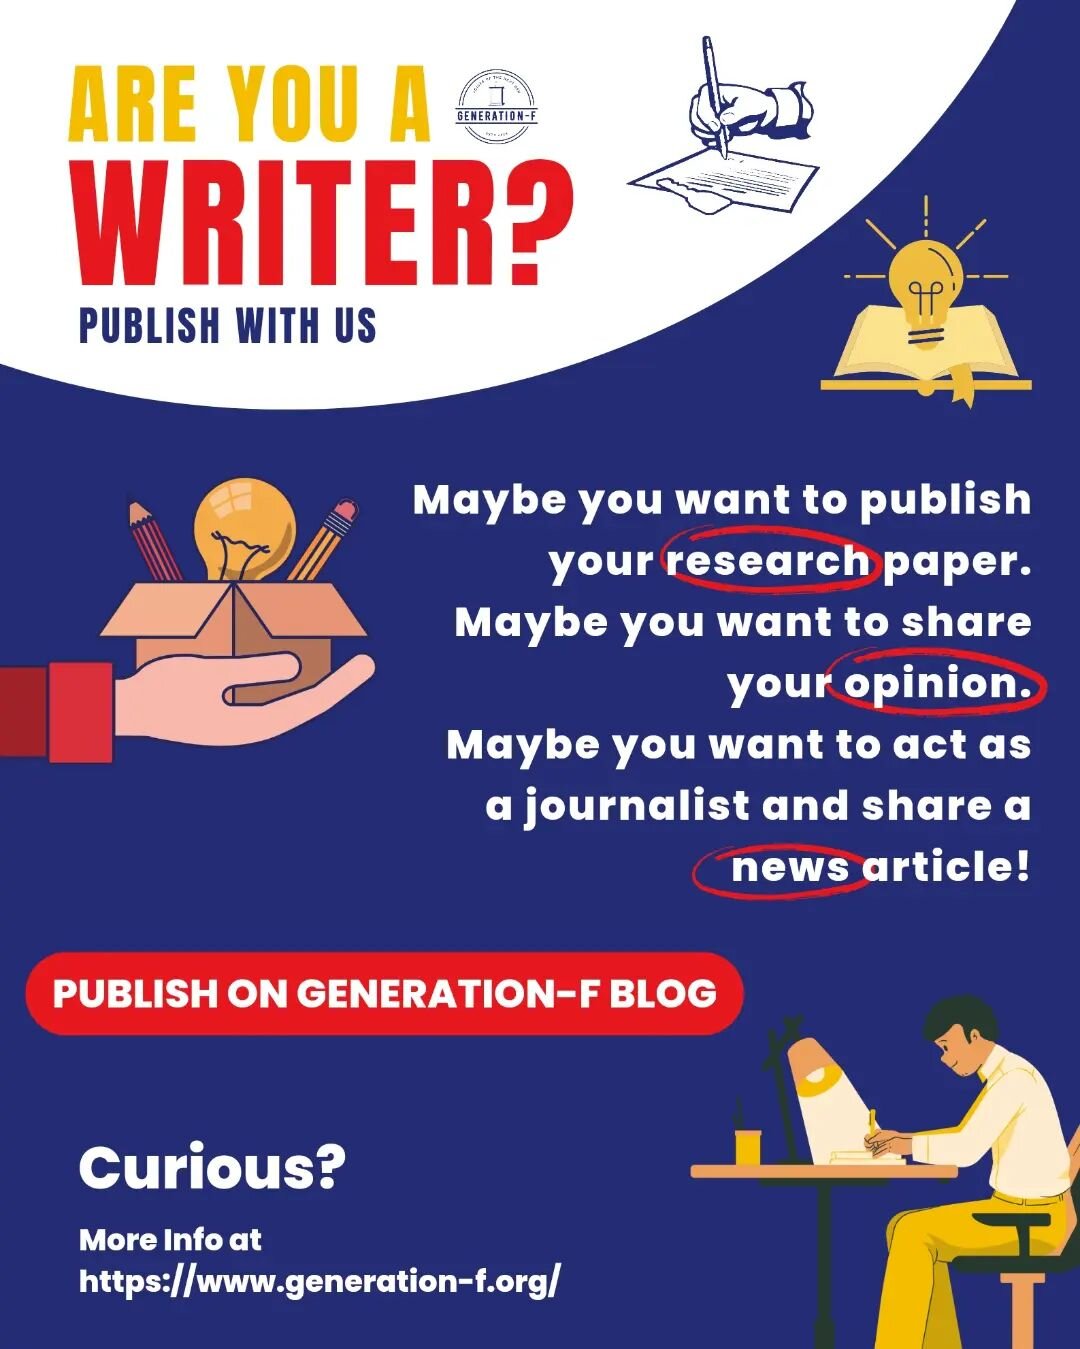 Too lazy to click the link in bio? Read caption 👇

To publish, you can either:

- be a registered blogger in Gen-F
(have to publish a minimum of two articles per month, would be considered a member of Gen-F)

- request single-publishing 
(meaning th